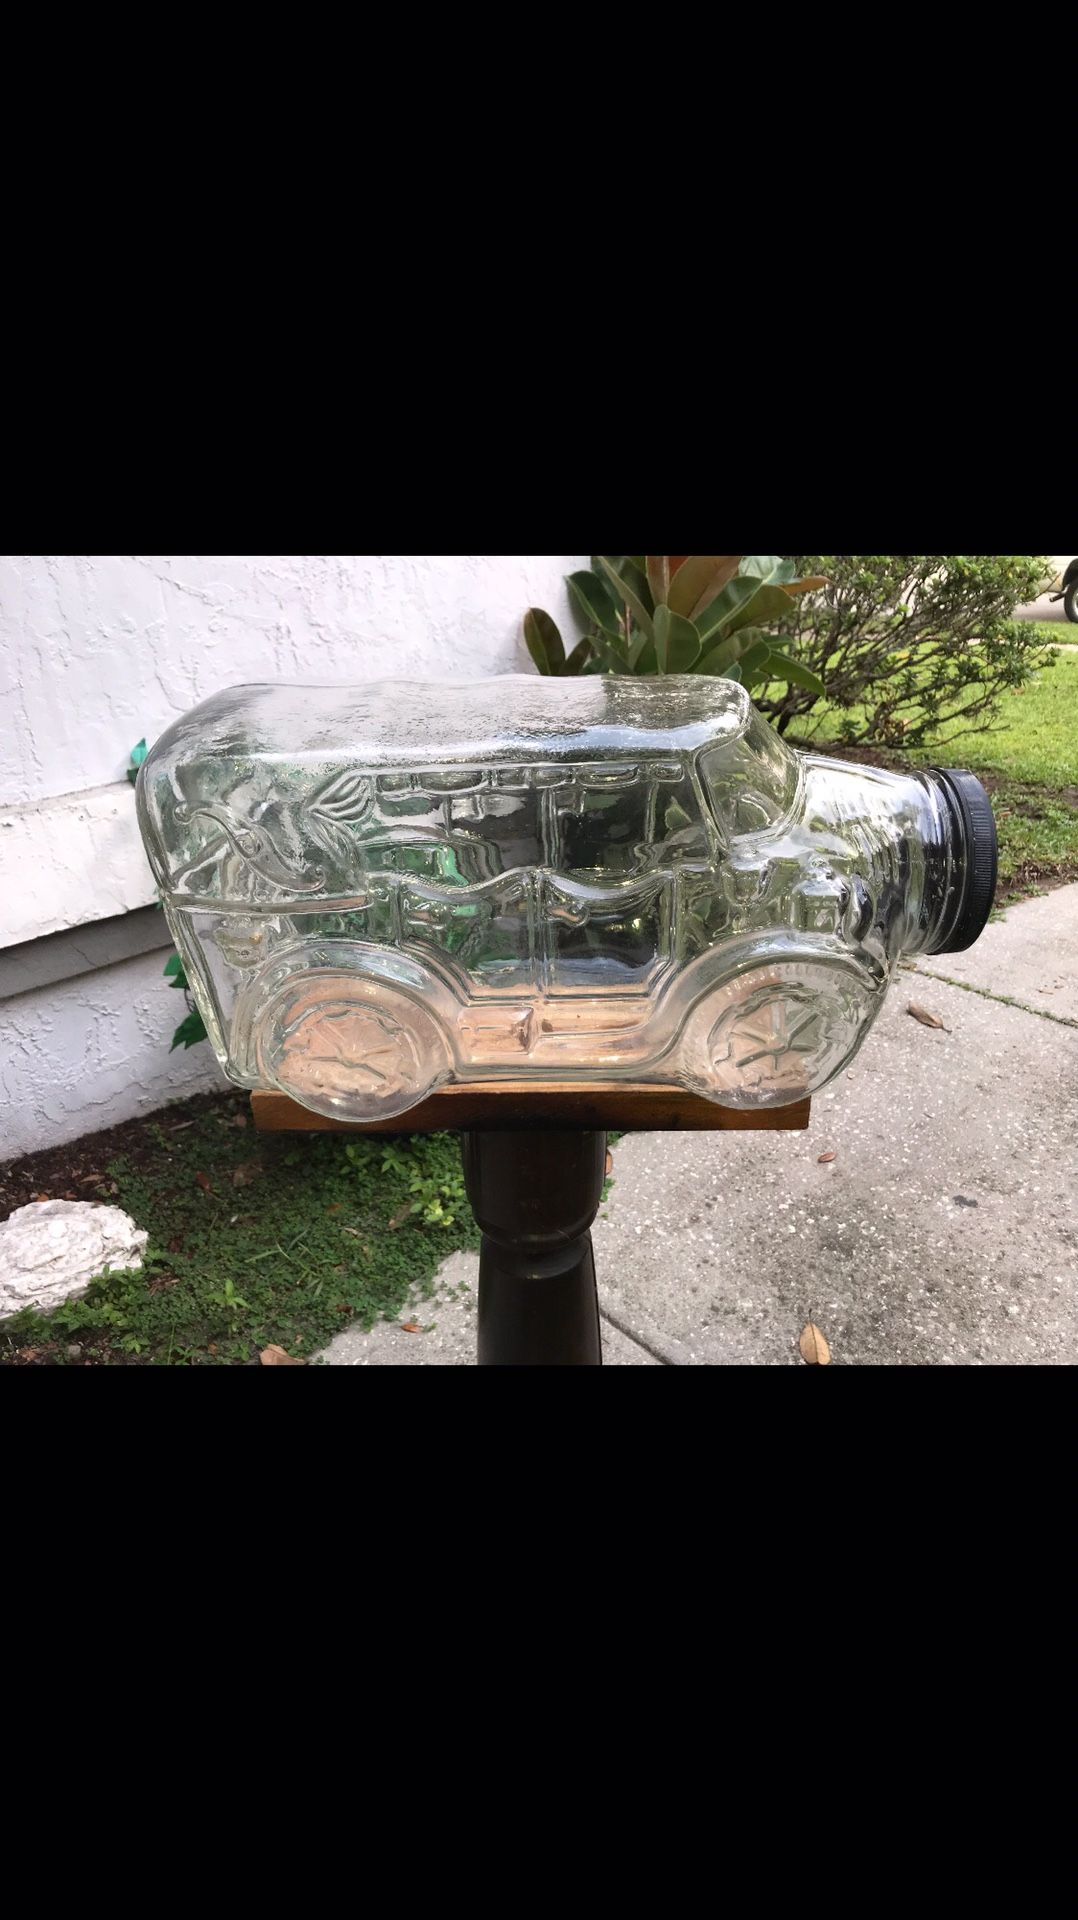 Rare vintage 1987 Libby 5 gallon glass car jar Large candy jar/cookie jar measurements  20 inches in length 10 inches in width 11 inches in height $35